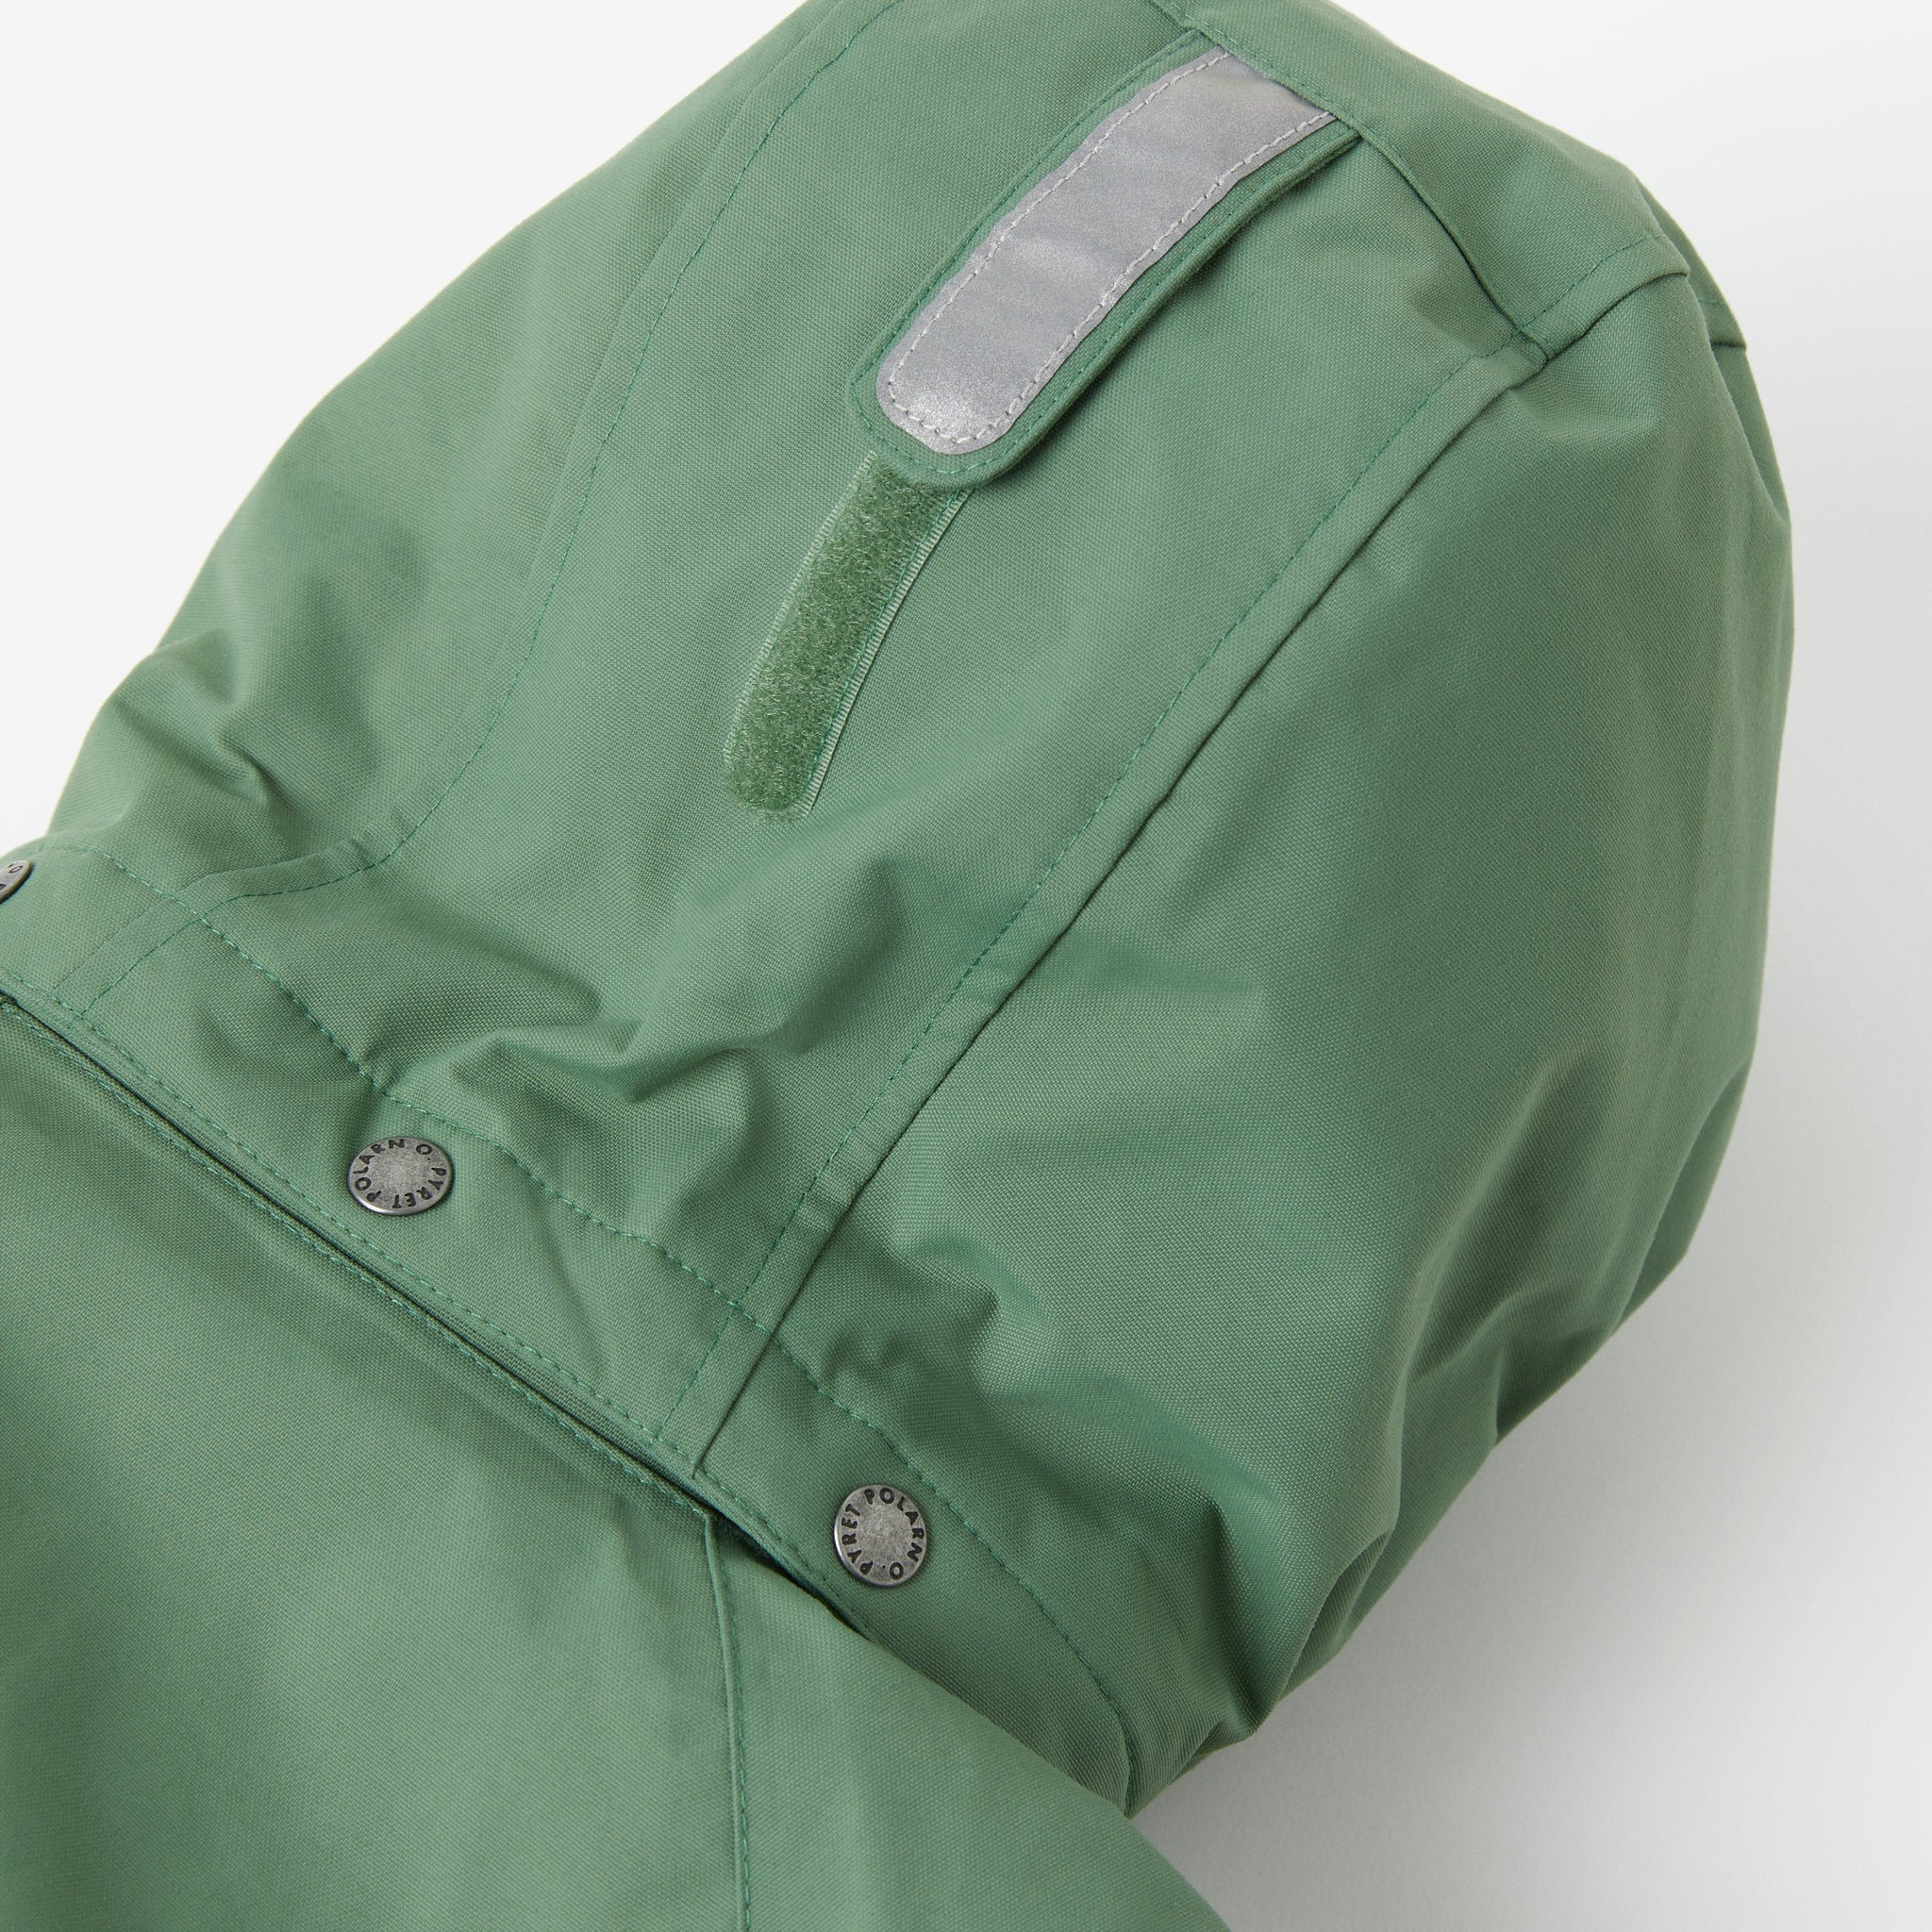 Green Kids Waterproof Overall from the Polarn O. Pyret kidswear collection. Ethically produced outerwear.